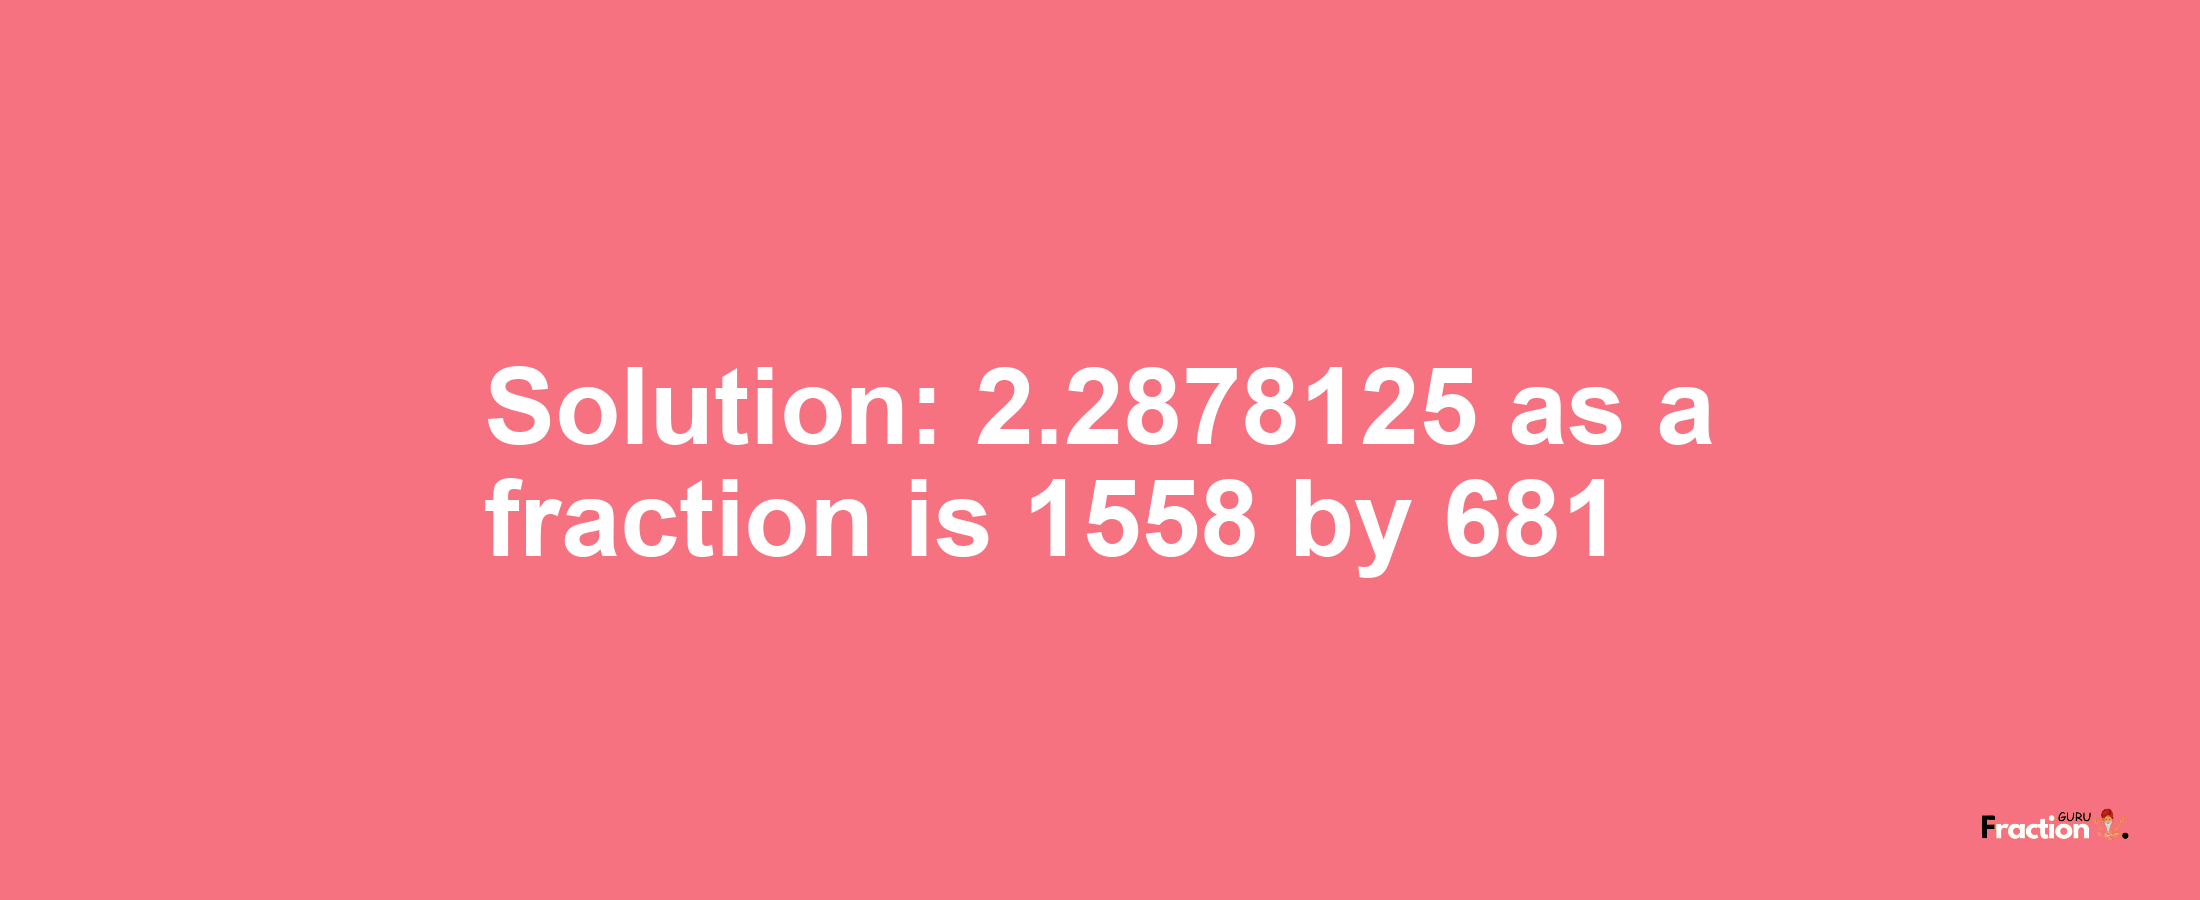 Solution:2.2878125 as a fraction is 1558/681